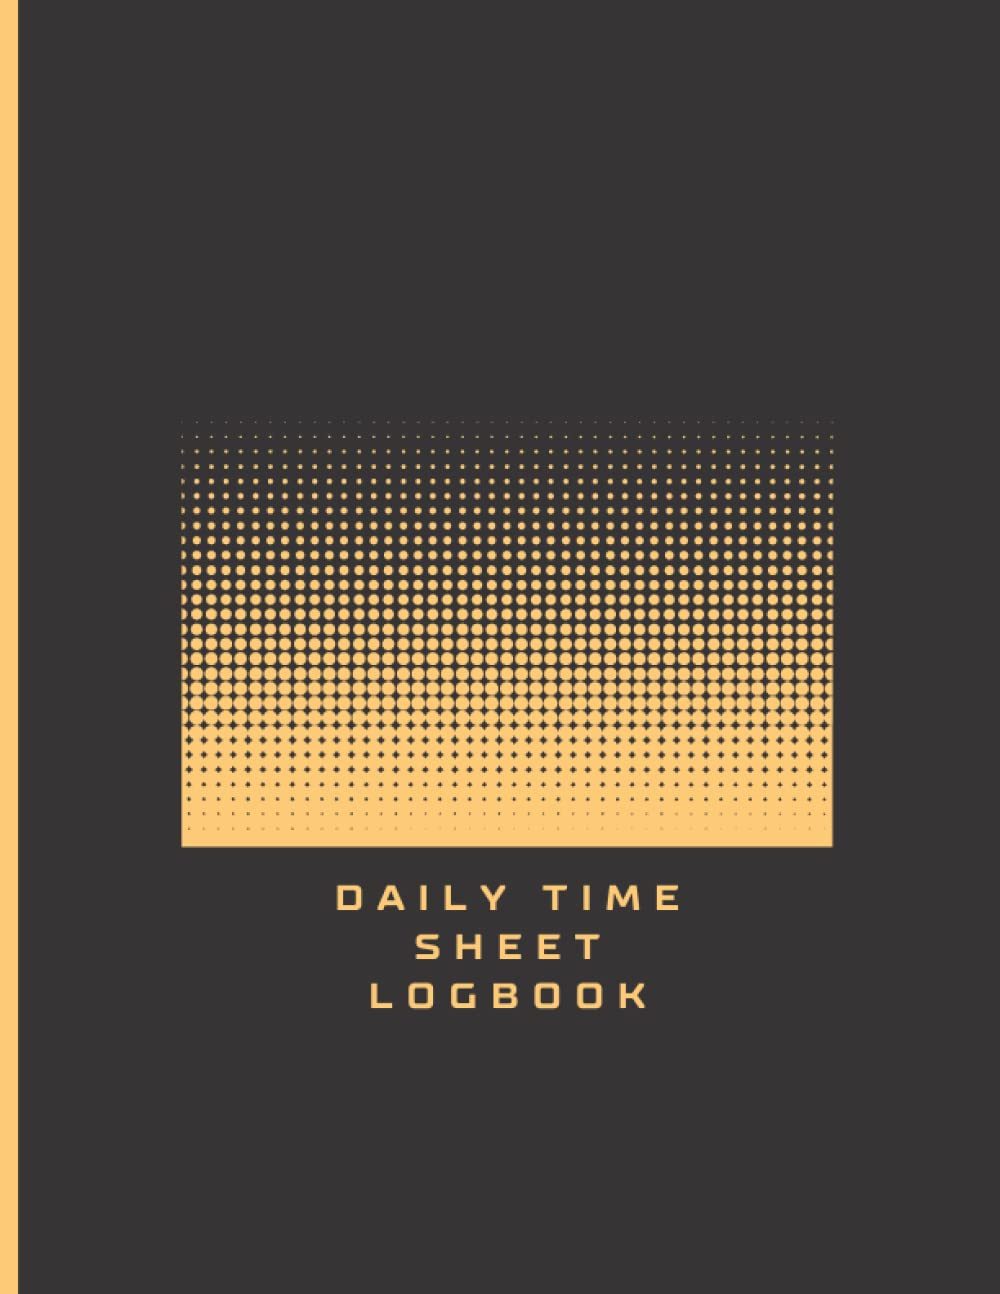 Daily time sheet log book: Weekly Notebook planner to monitor working hours and employee time log